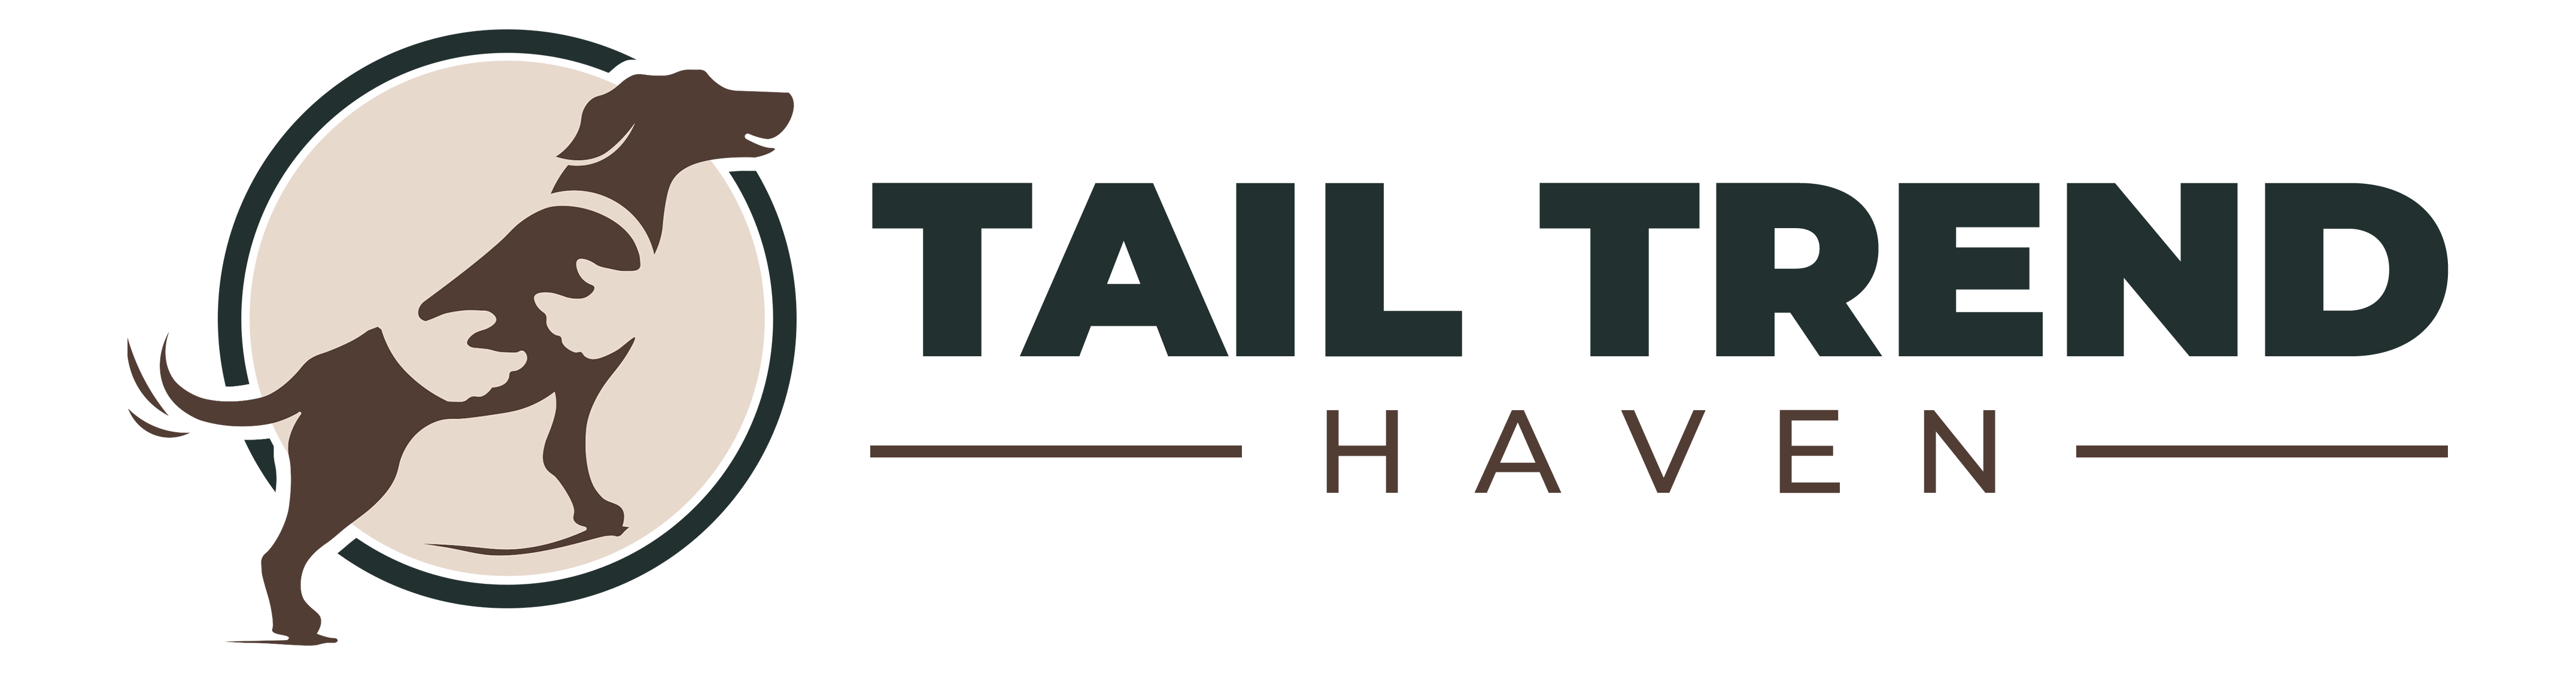 TailTrendHaven 